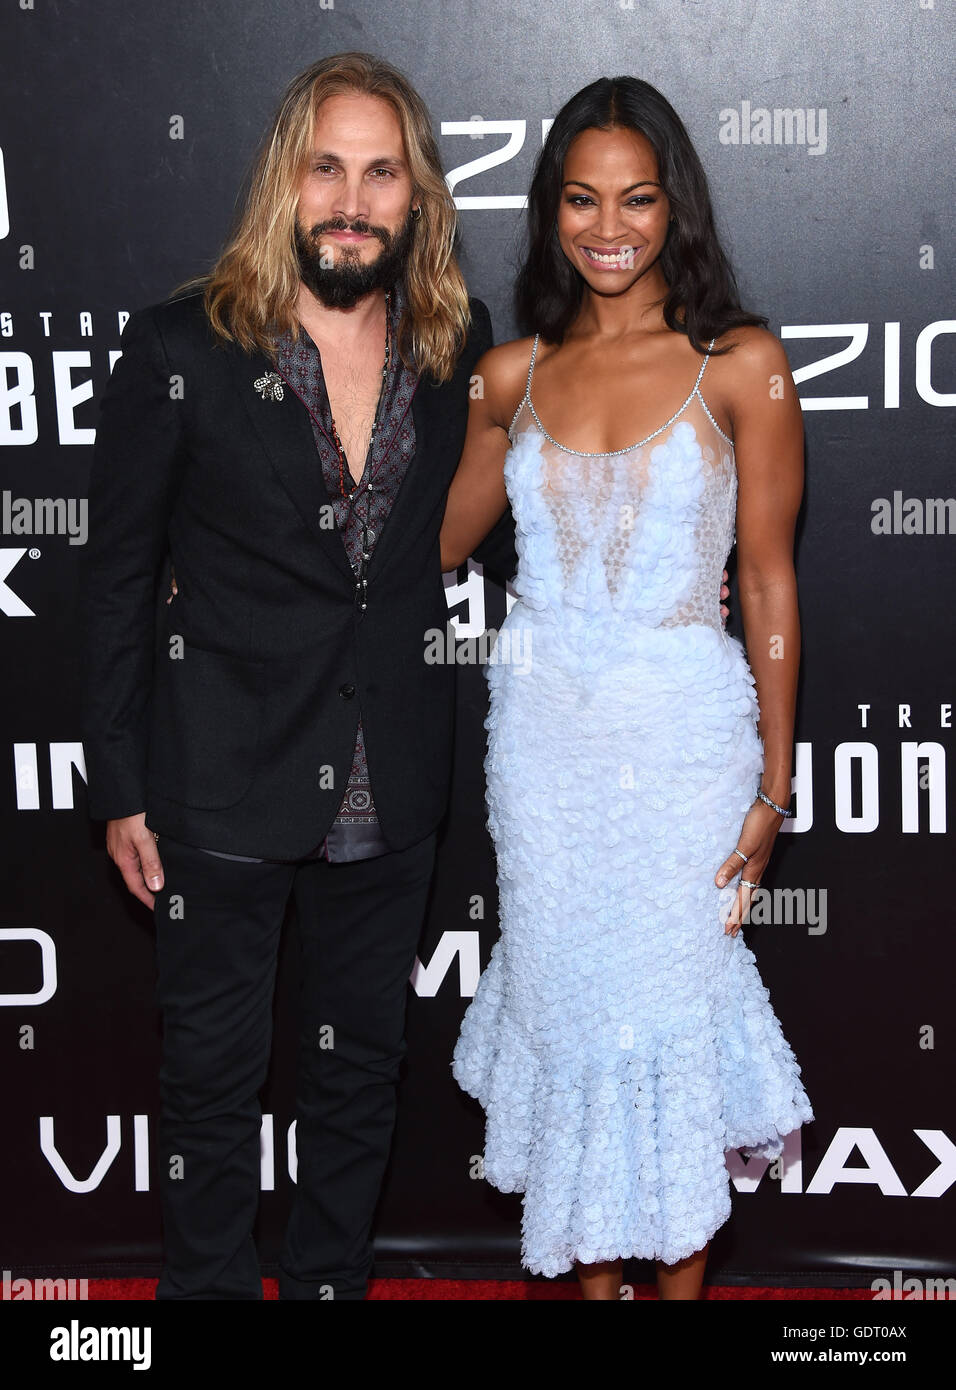 San Diego, California, USA. 20th July, 2016. Zoe Saldana & Marco Perego arrives for the premiere of the film 'Star Trek Beyond' at the Embarcadero Marina Park. Credit:  Lisa O'Connor/ZUMA Wire/Alamy Live News Stock Photo